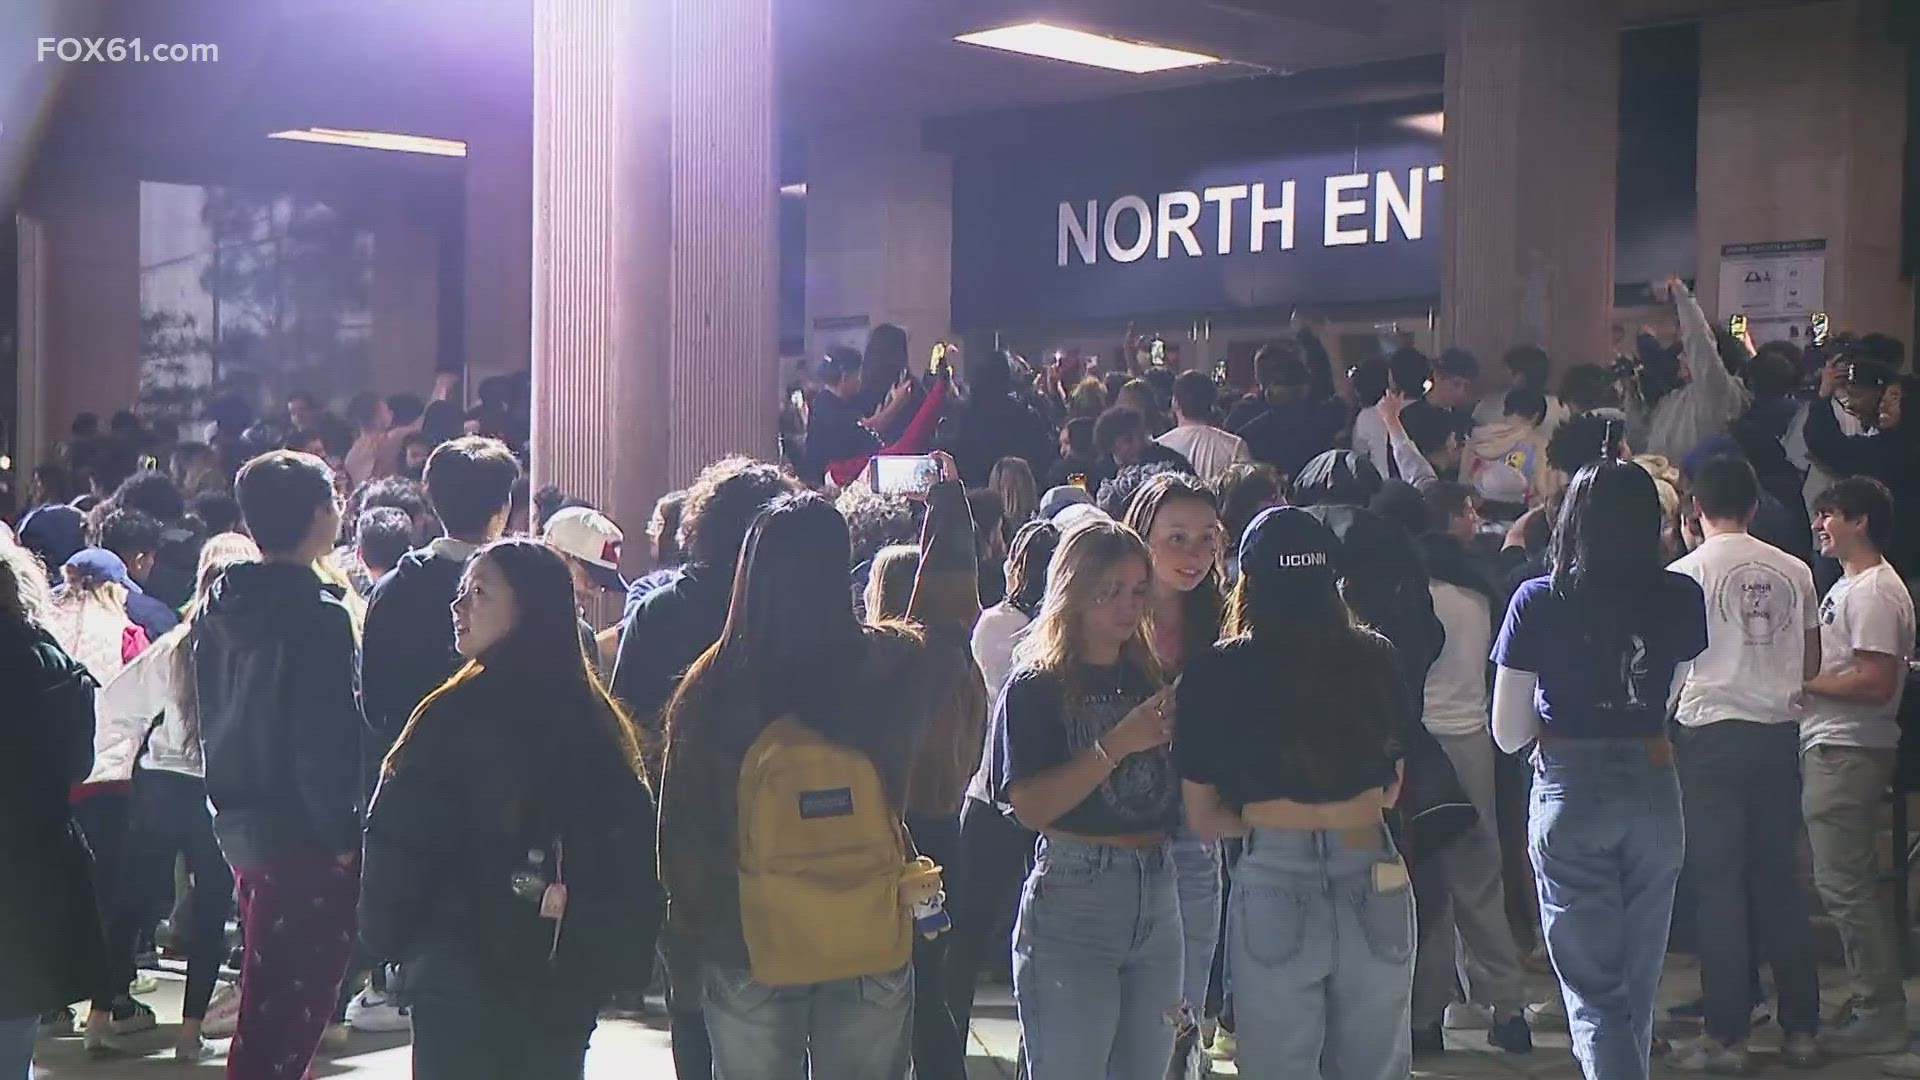 The Husky Hype for the national championship quickly turned to frustration for students as all Gampel entrances were shut just before tip-off.